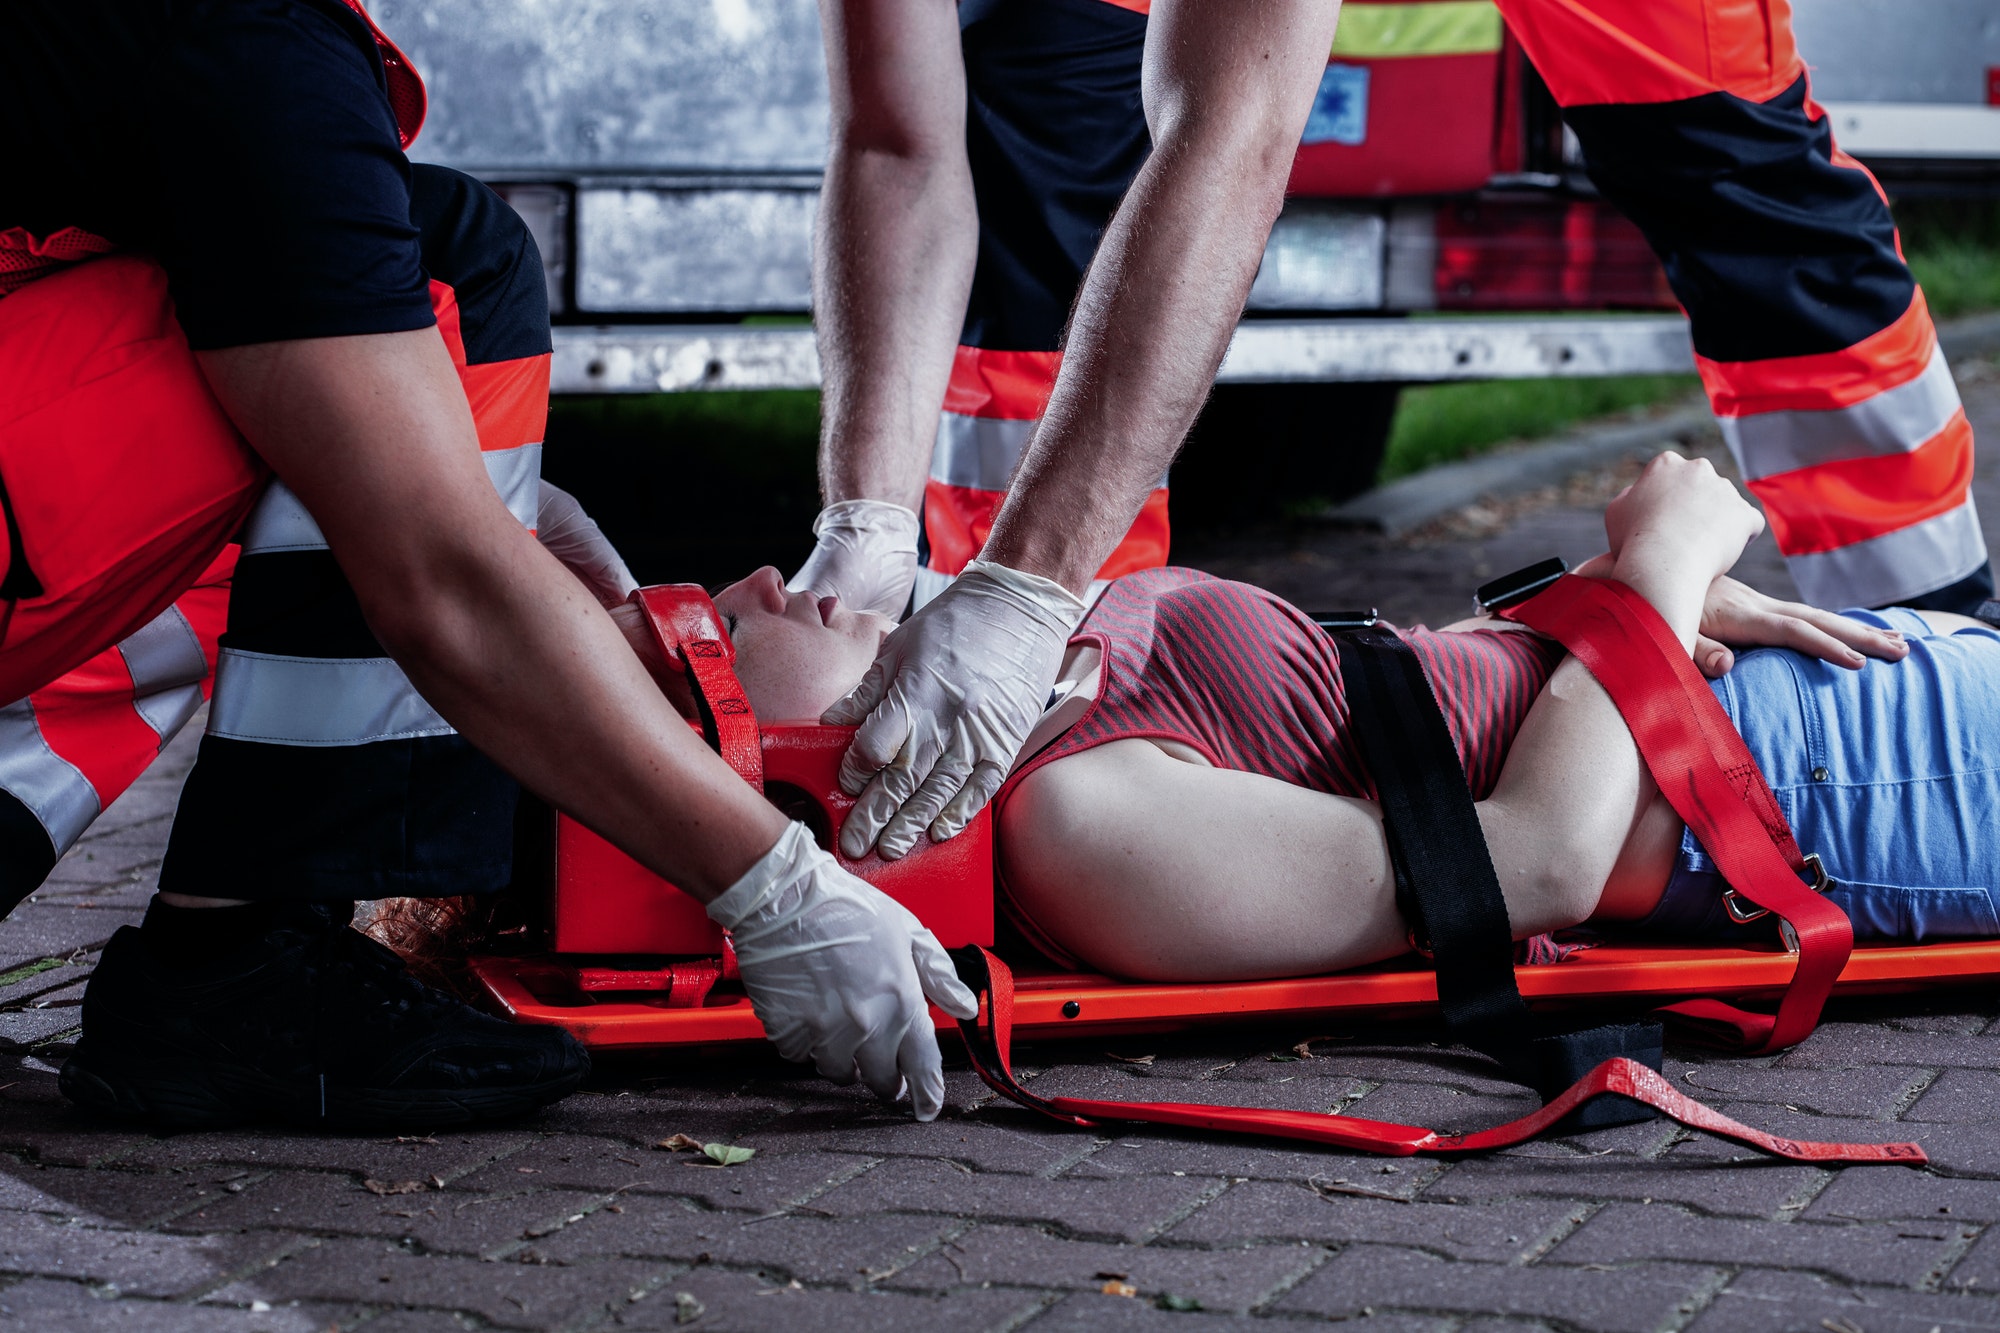 Professional medical rescuer bending over a car accident victim lying on a stretcher